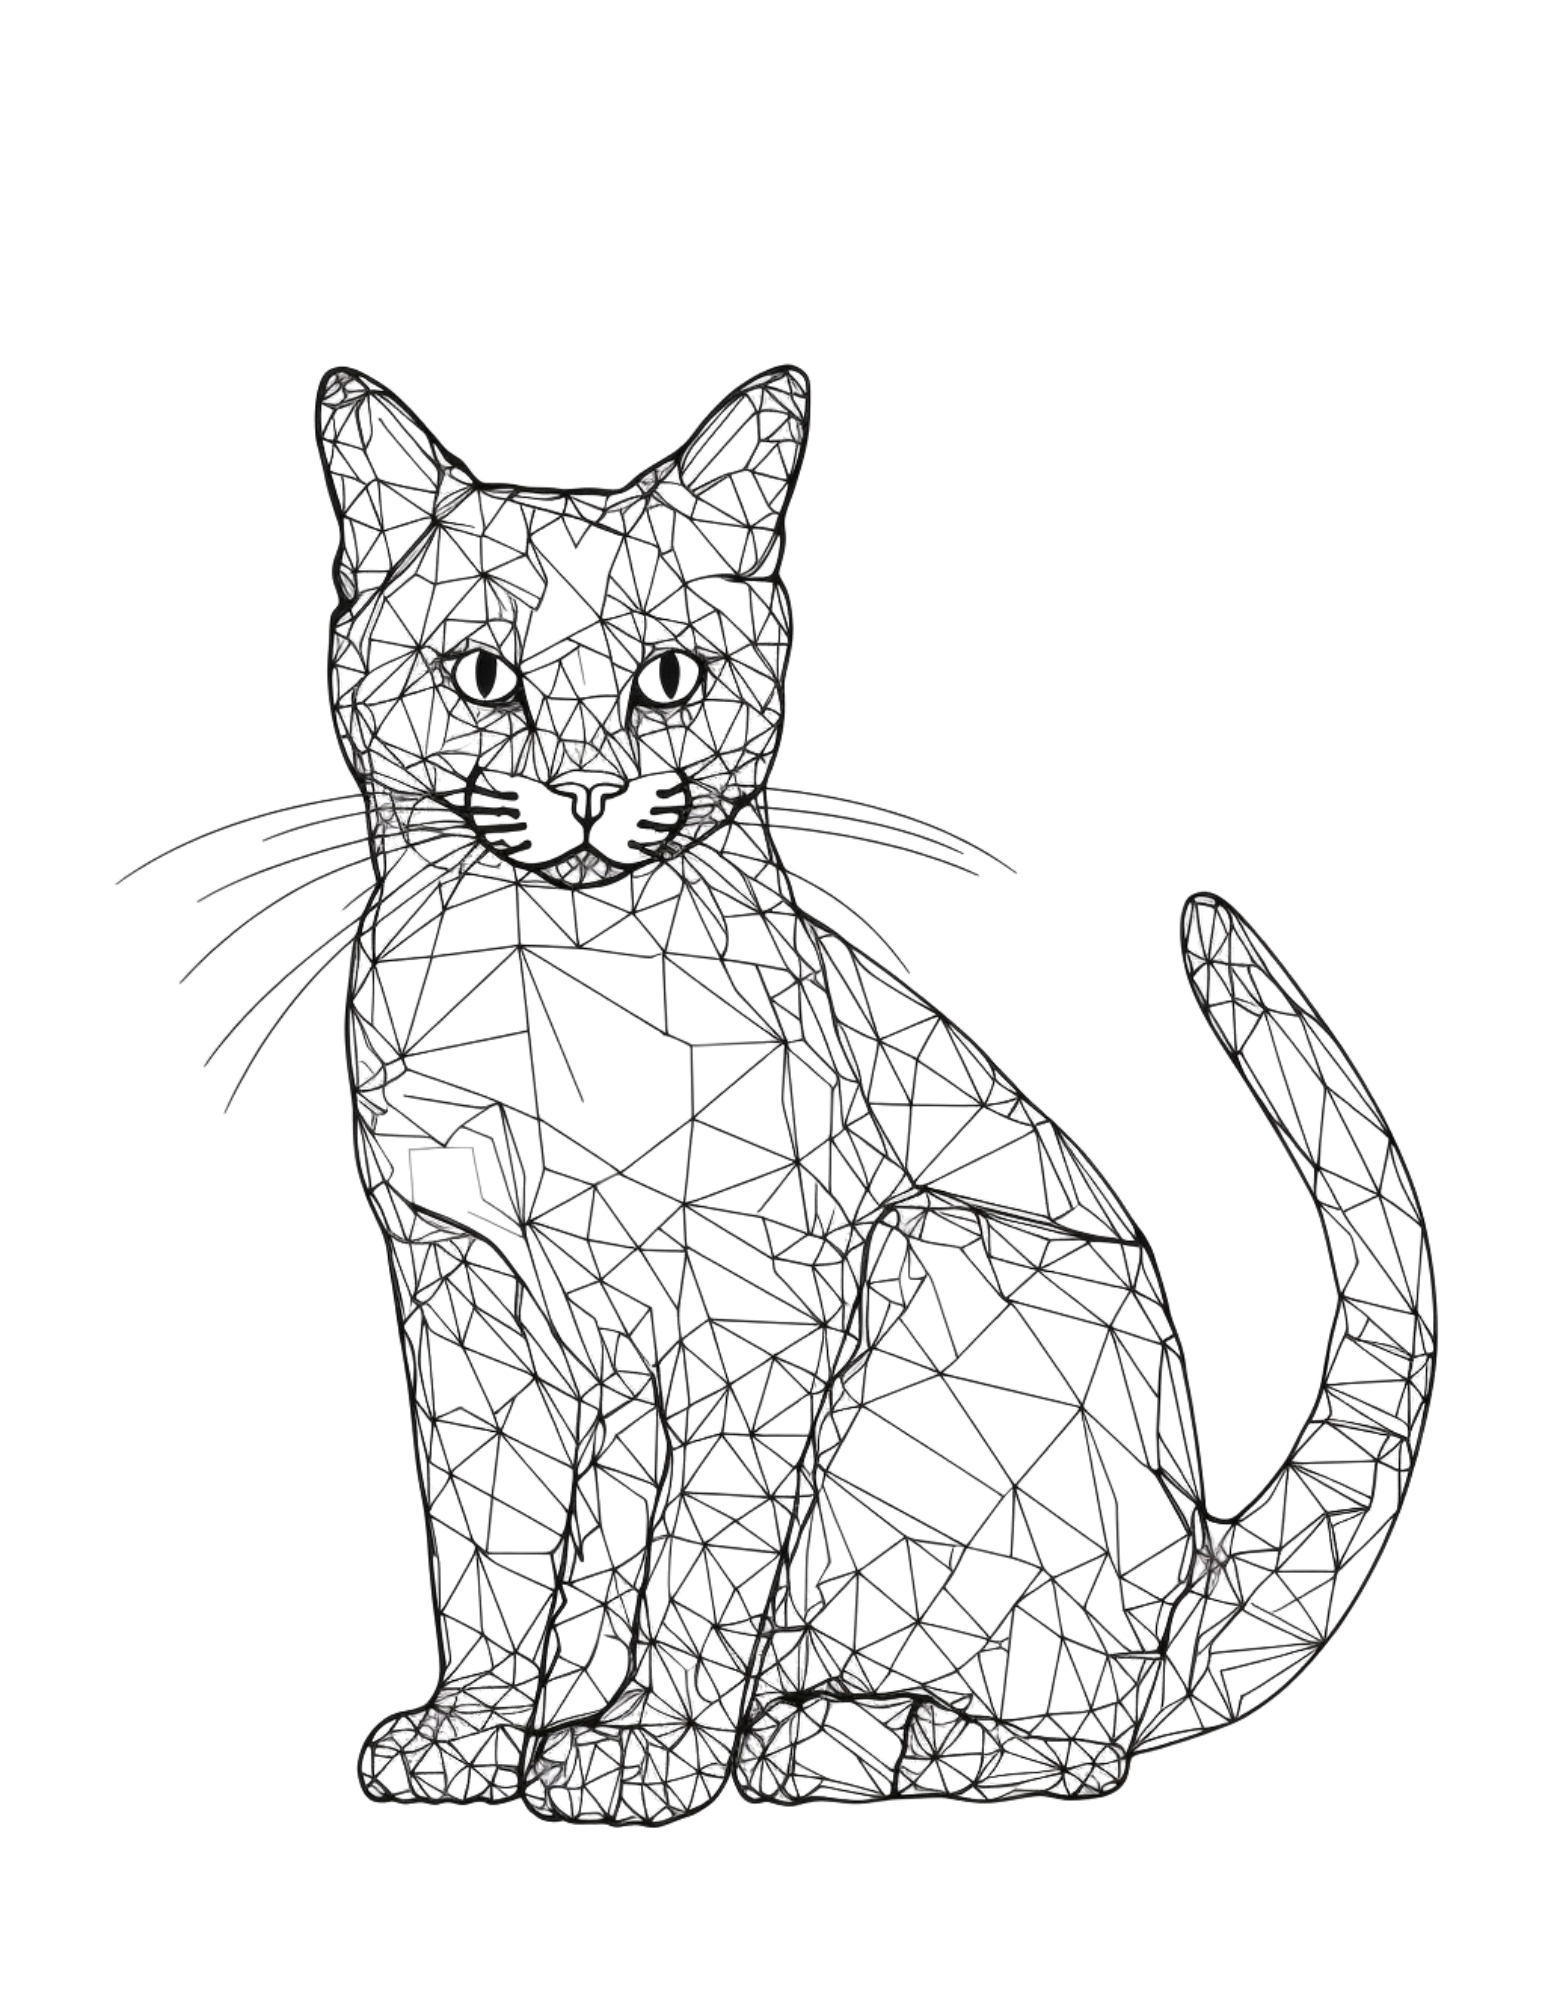 Printable digital cat coloring pages whimsycats coloring collection